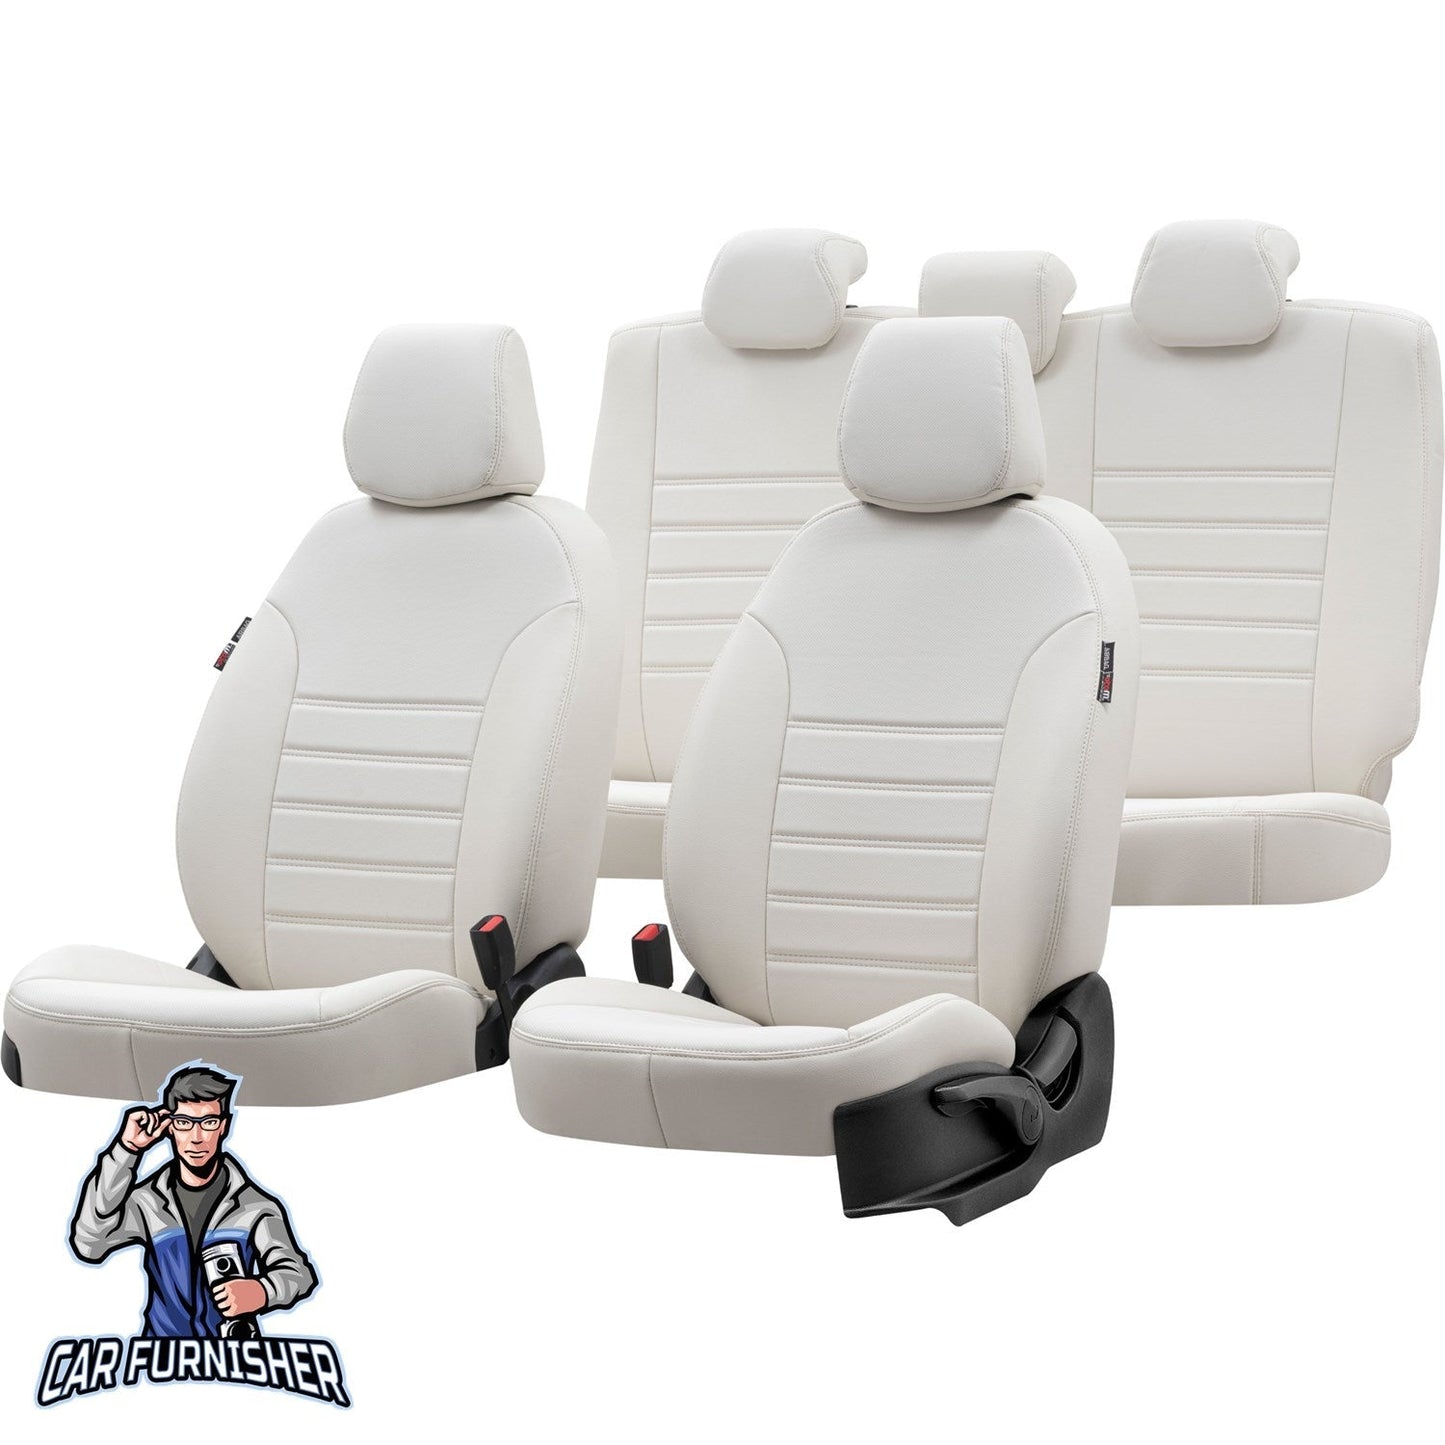 Seat Mii Seat Covers Istanbul Leather Design Ivory Leather